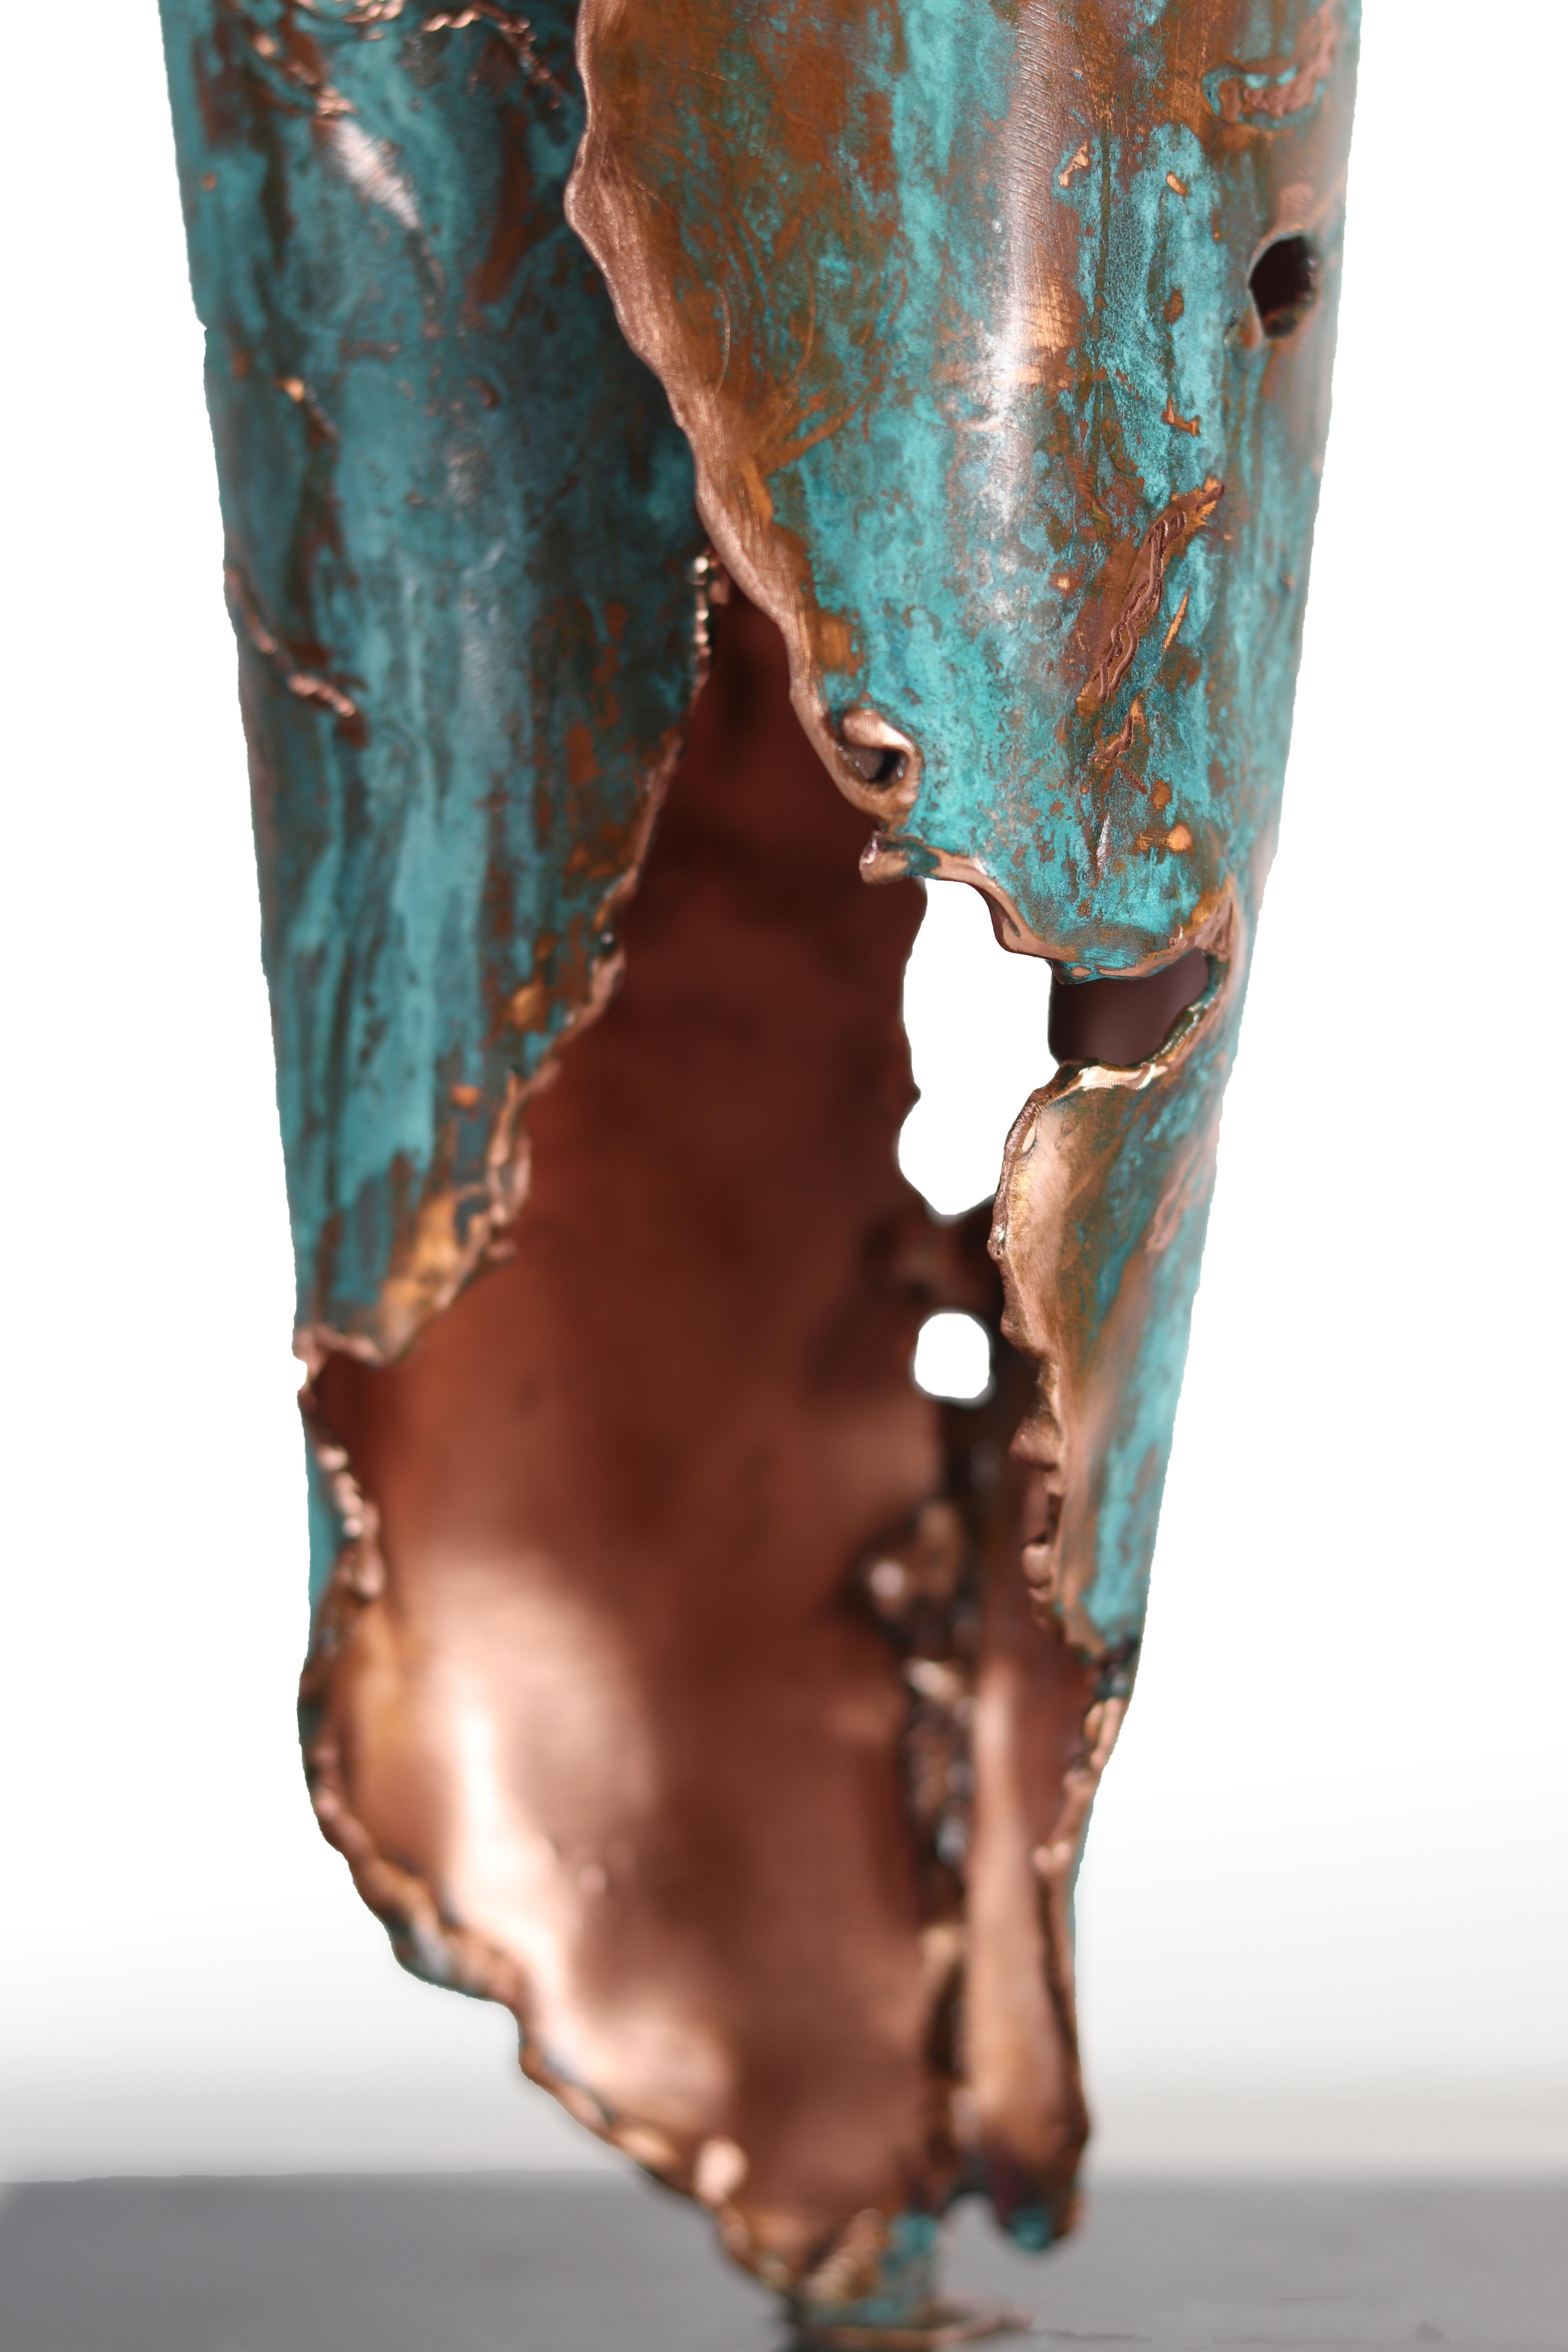 Copper hand sculpted Vase by Samuel Costantini
Entirely handmade by the artist
Edition 9 + 1 AP
Measures: Diameter 140mm height 400 mm.
Diameter 5.51 inches height 15.748 inches

A small shoot begins to see the light under a carpet of
fallen